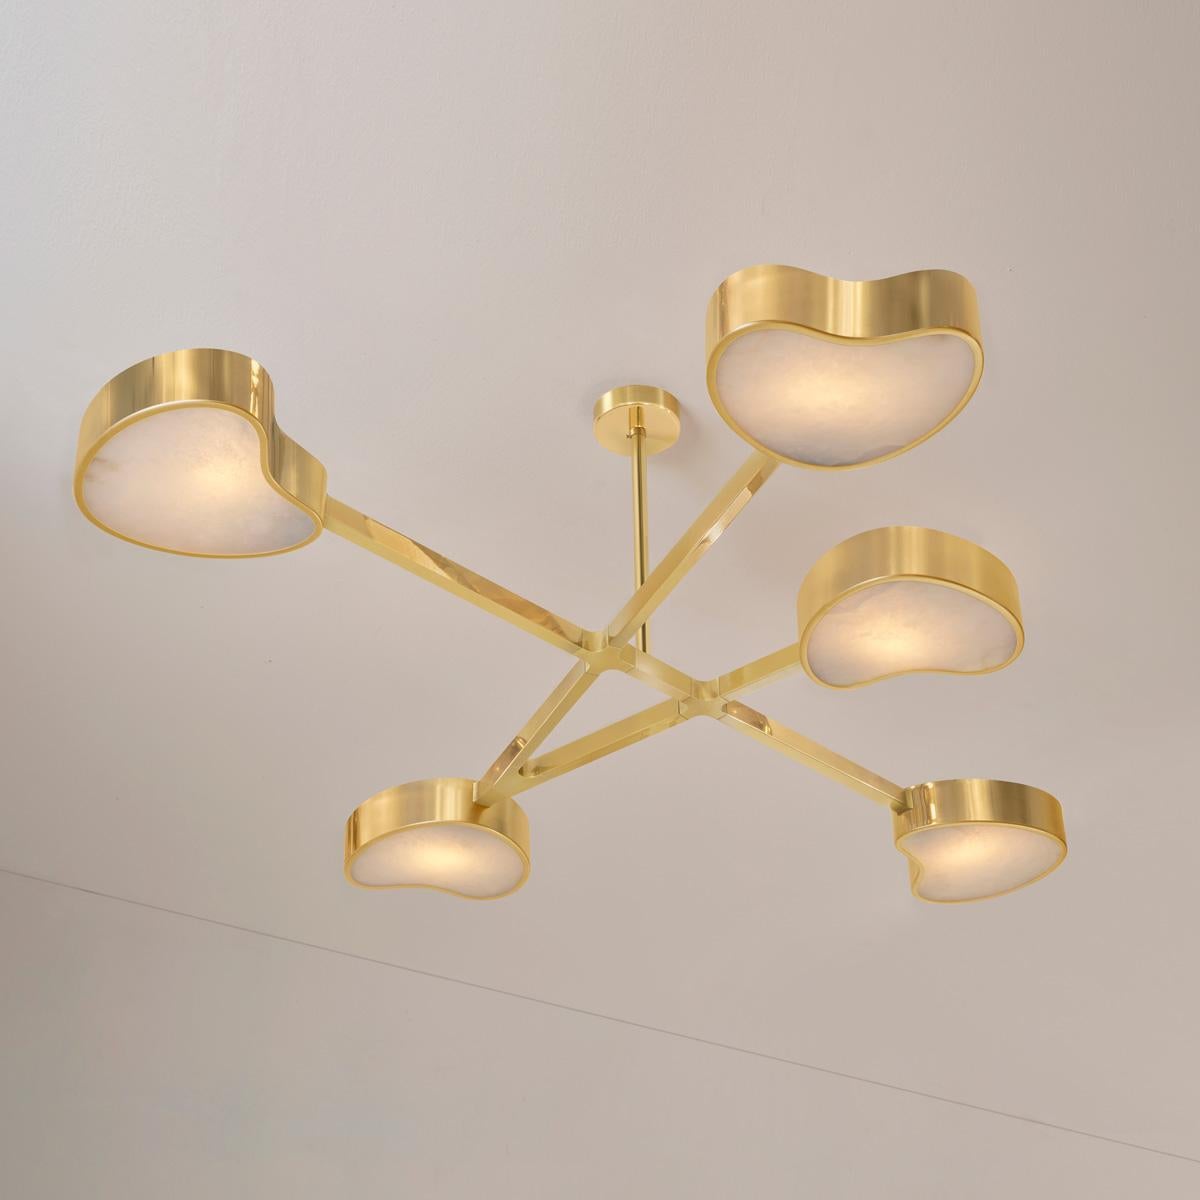 Cuore N.5 Ceiling Light by Gaspare Asaro. Peltro and Bronze Finish For Sale 1